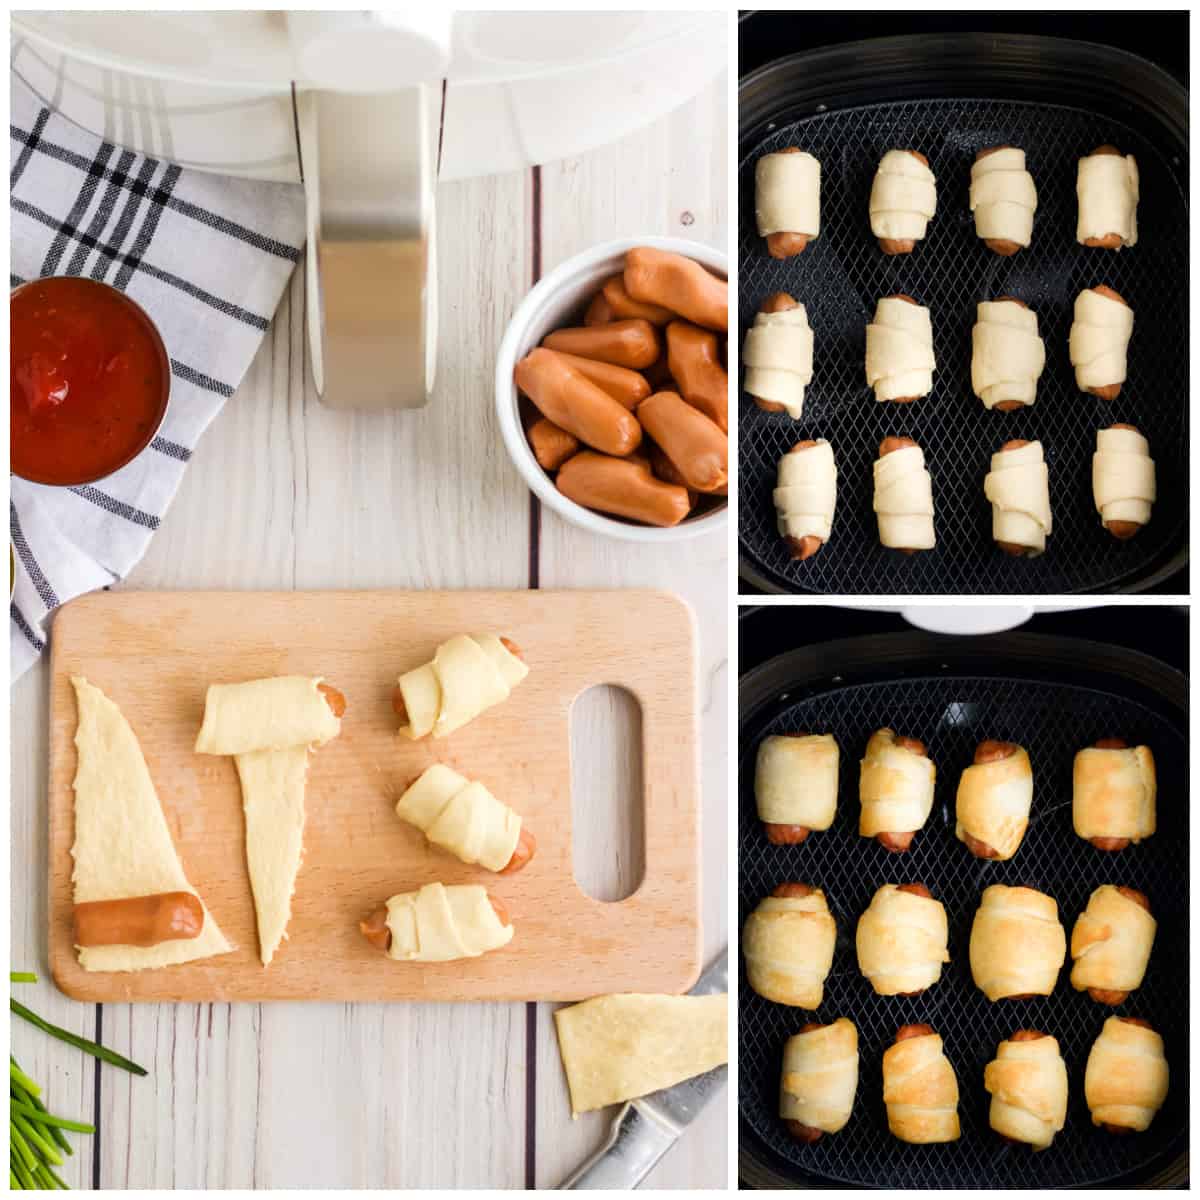 Step by step photos on how to make Air Fryer Pigs in a Blanket.